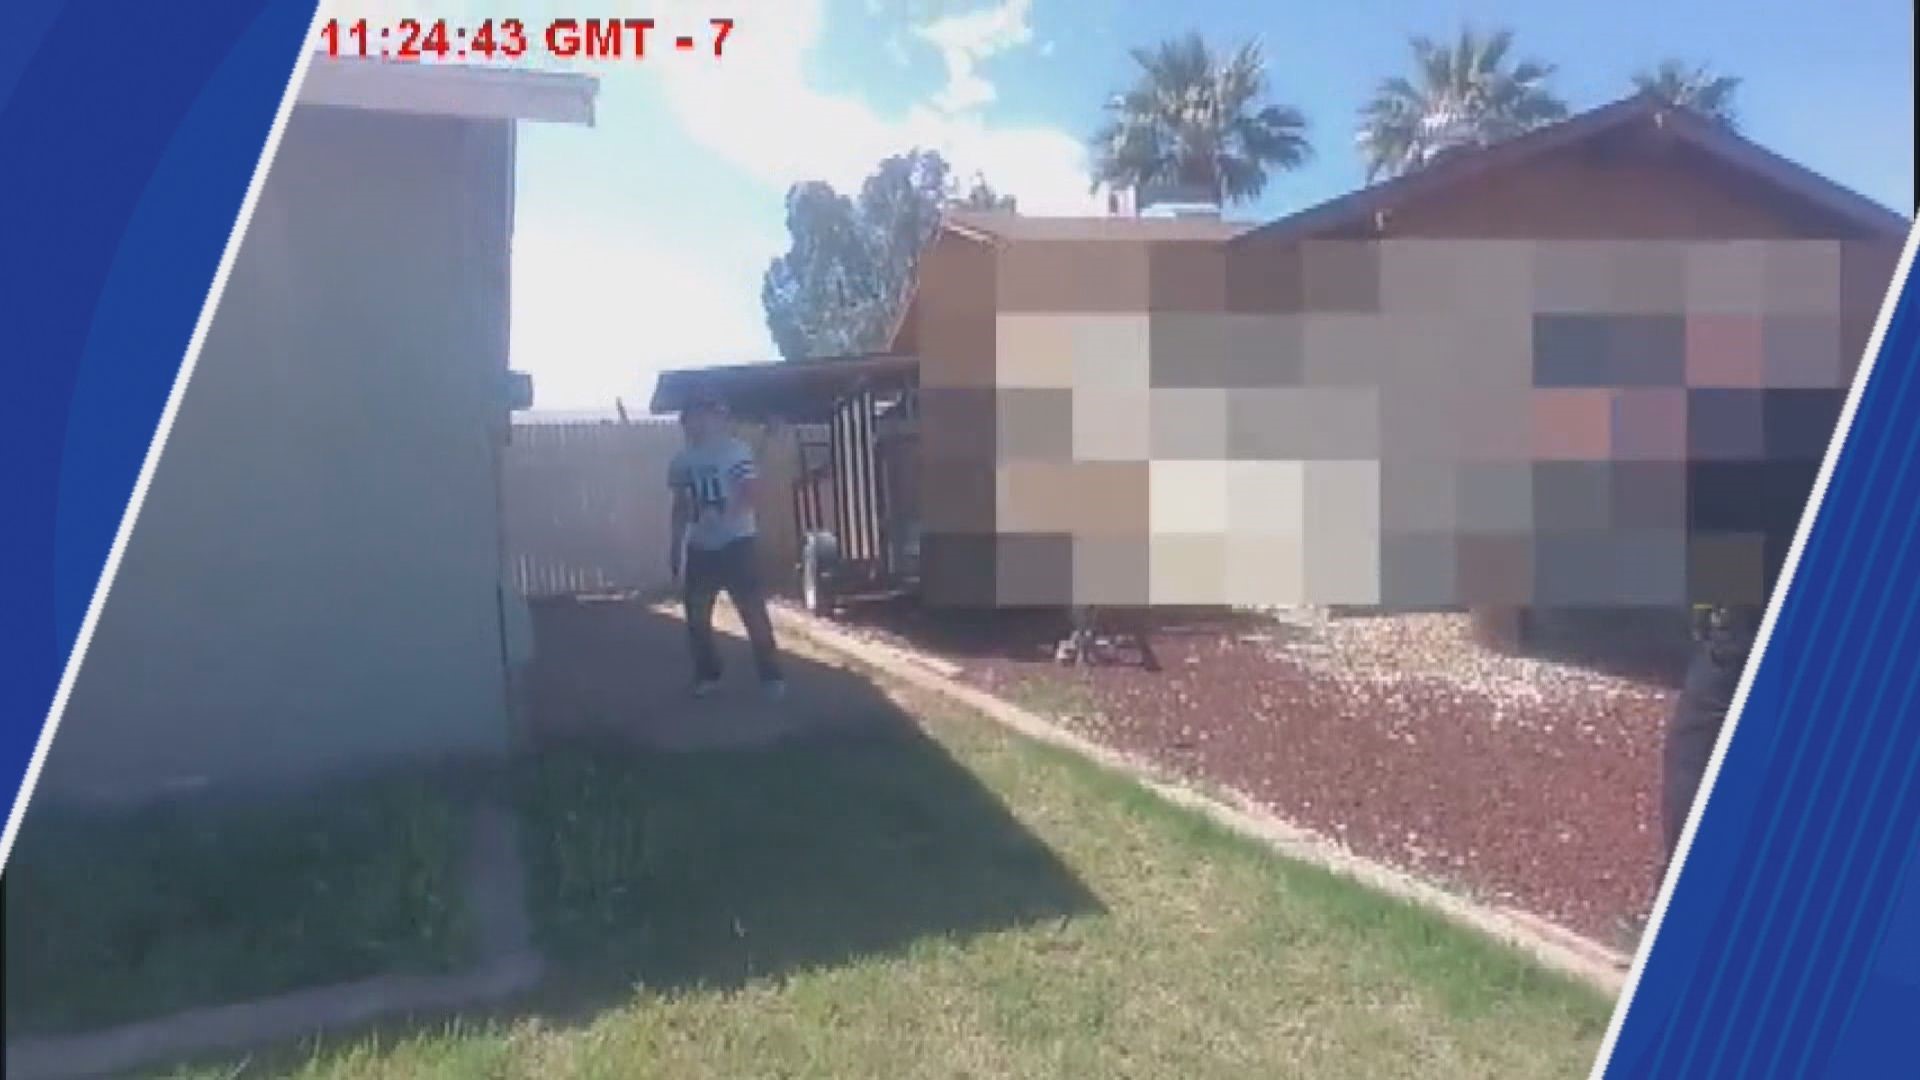 At first glance, the newly released body cam footage from a fatal shooting back in March raises questions about the use of force by Phoenix police against the suspect. Our expert analyzed the video to see if the use of force was justified.